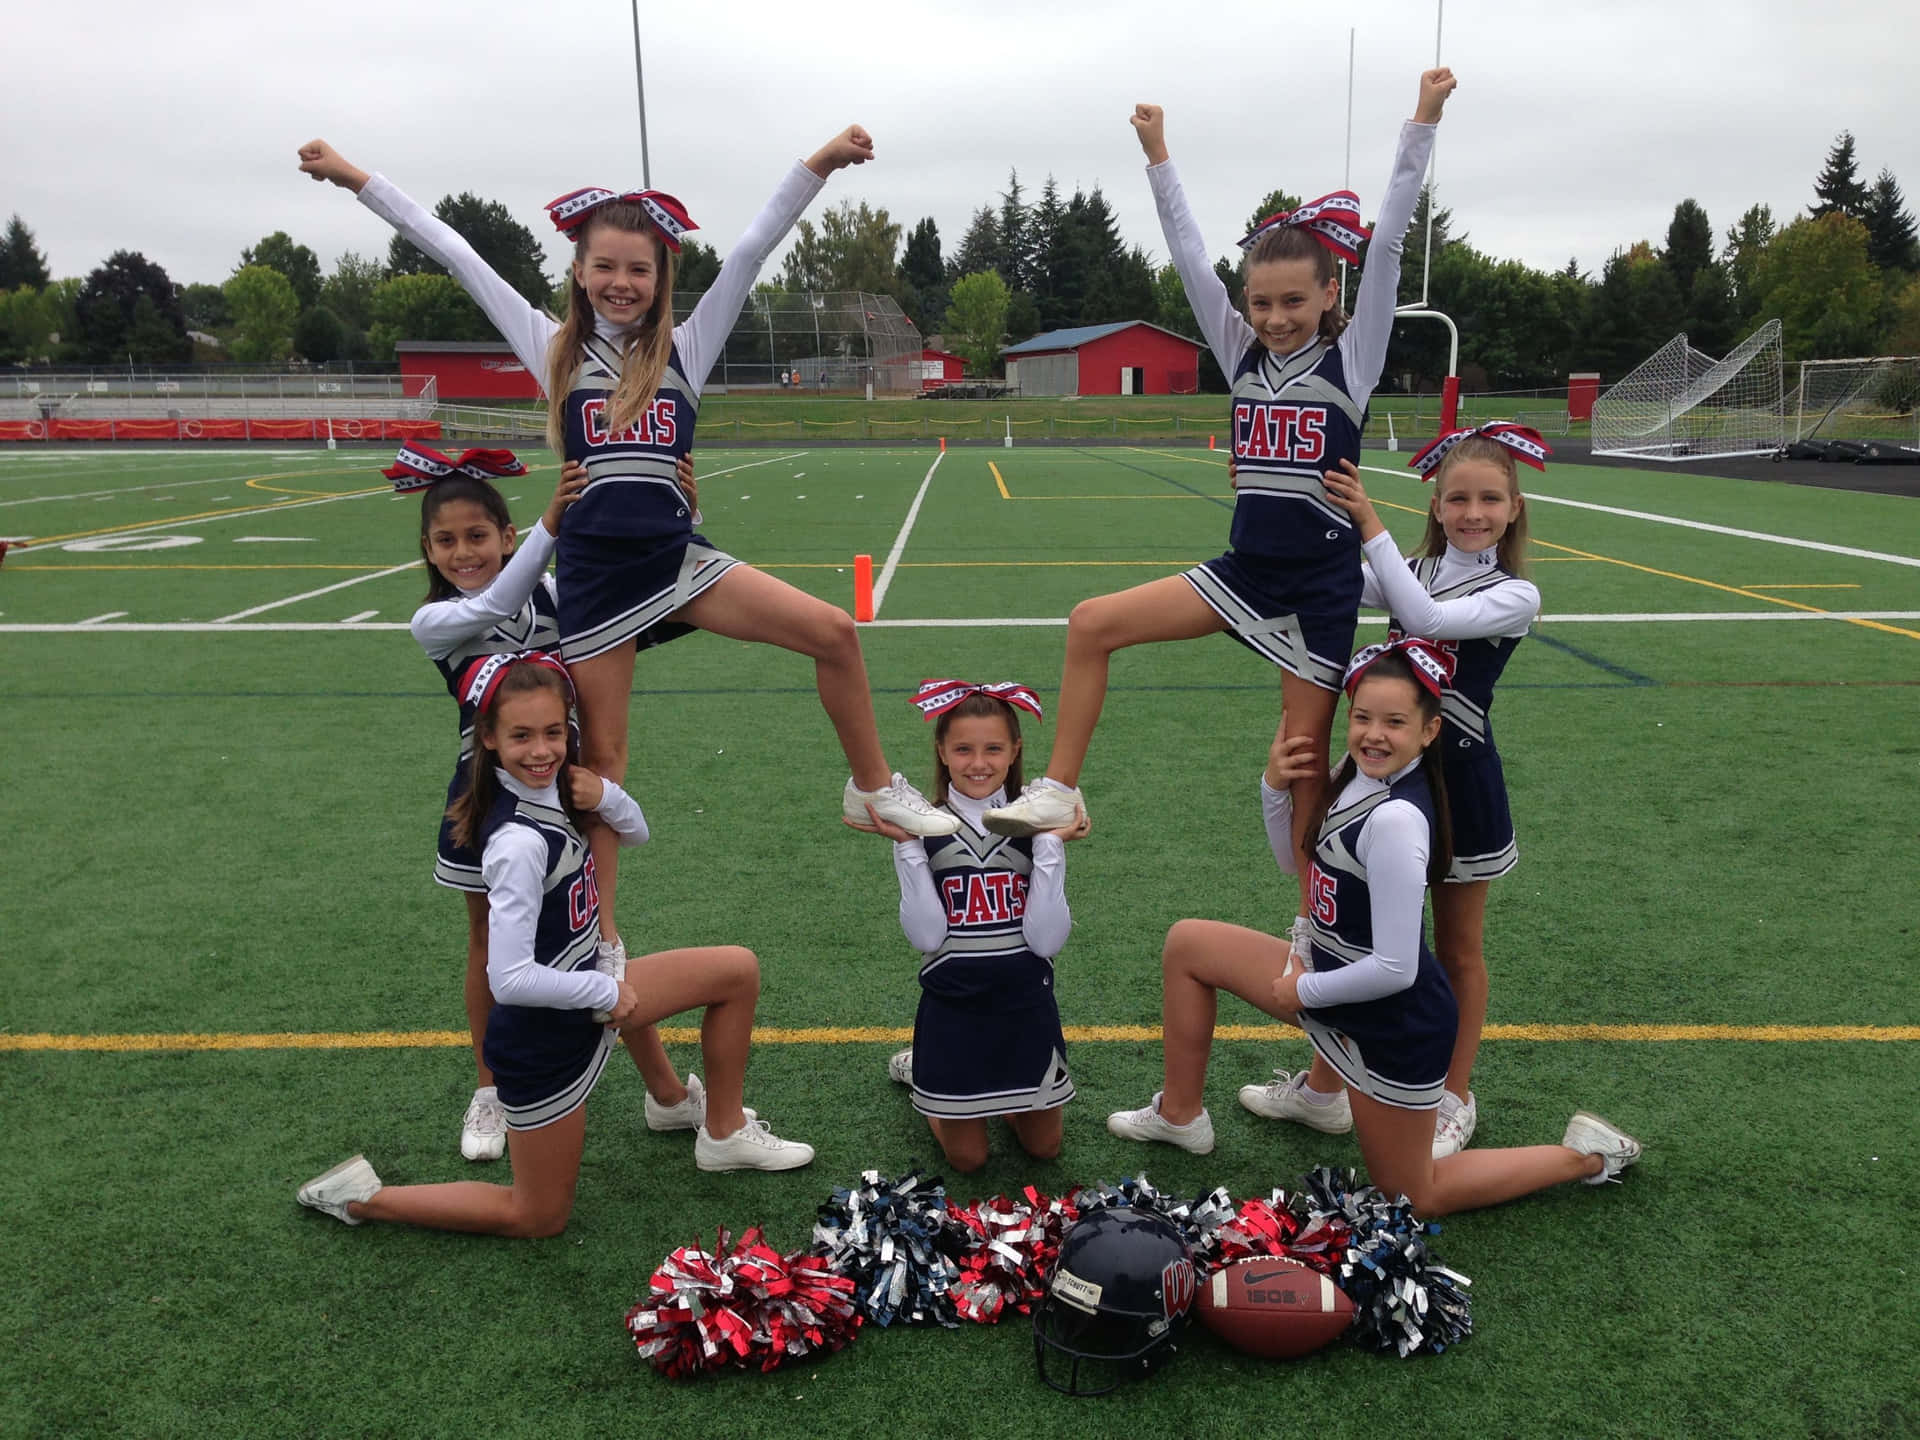 Unleash your spirit and show your passion for the game with Cheerleading!